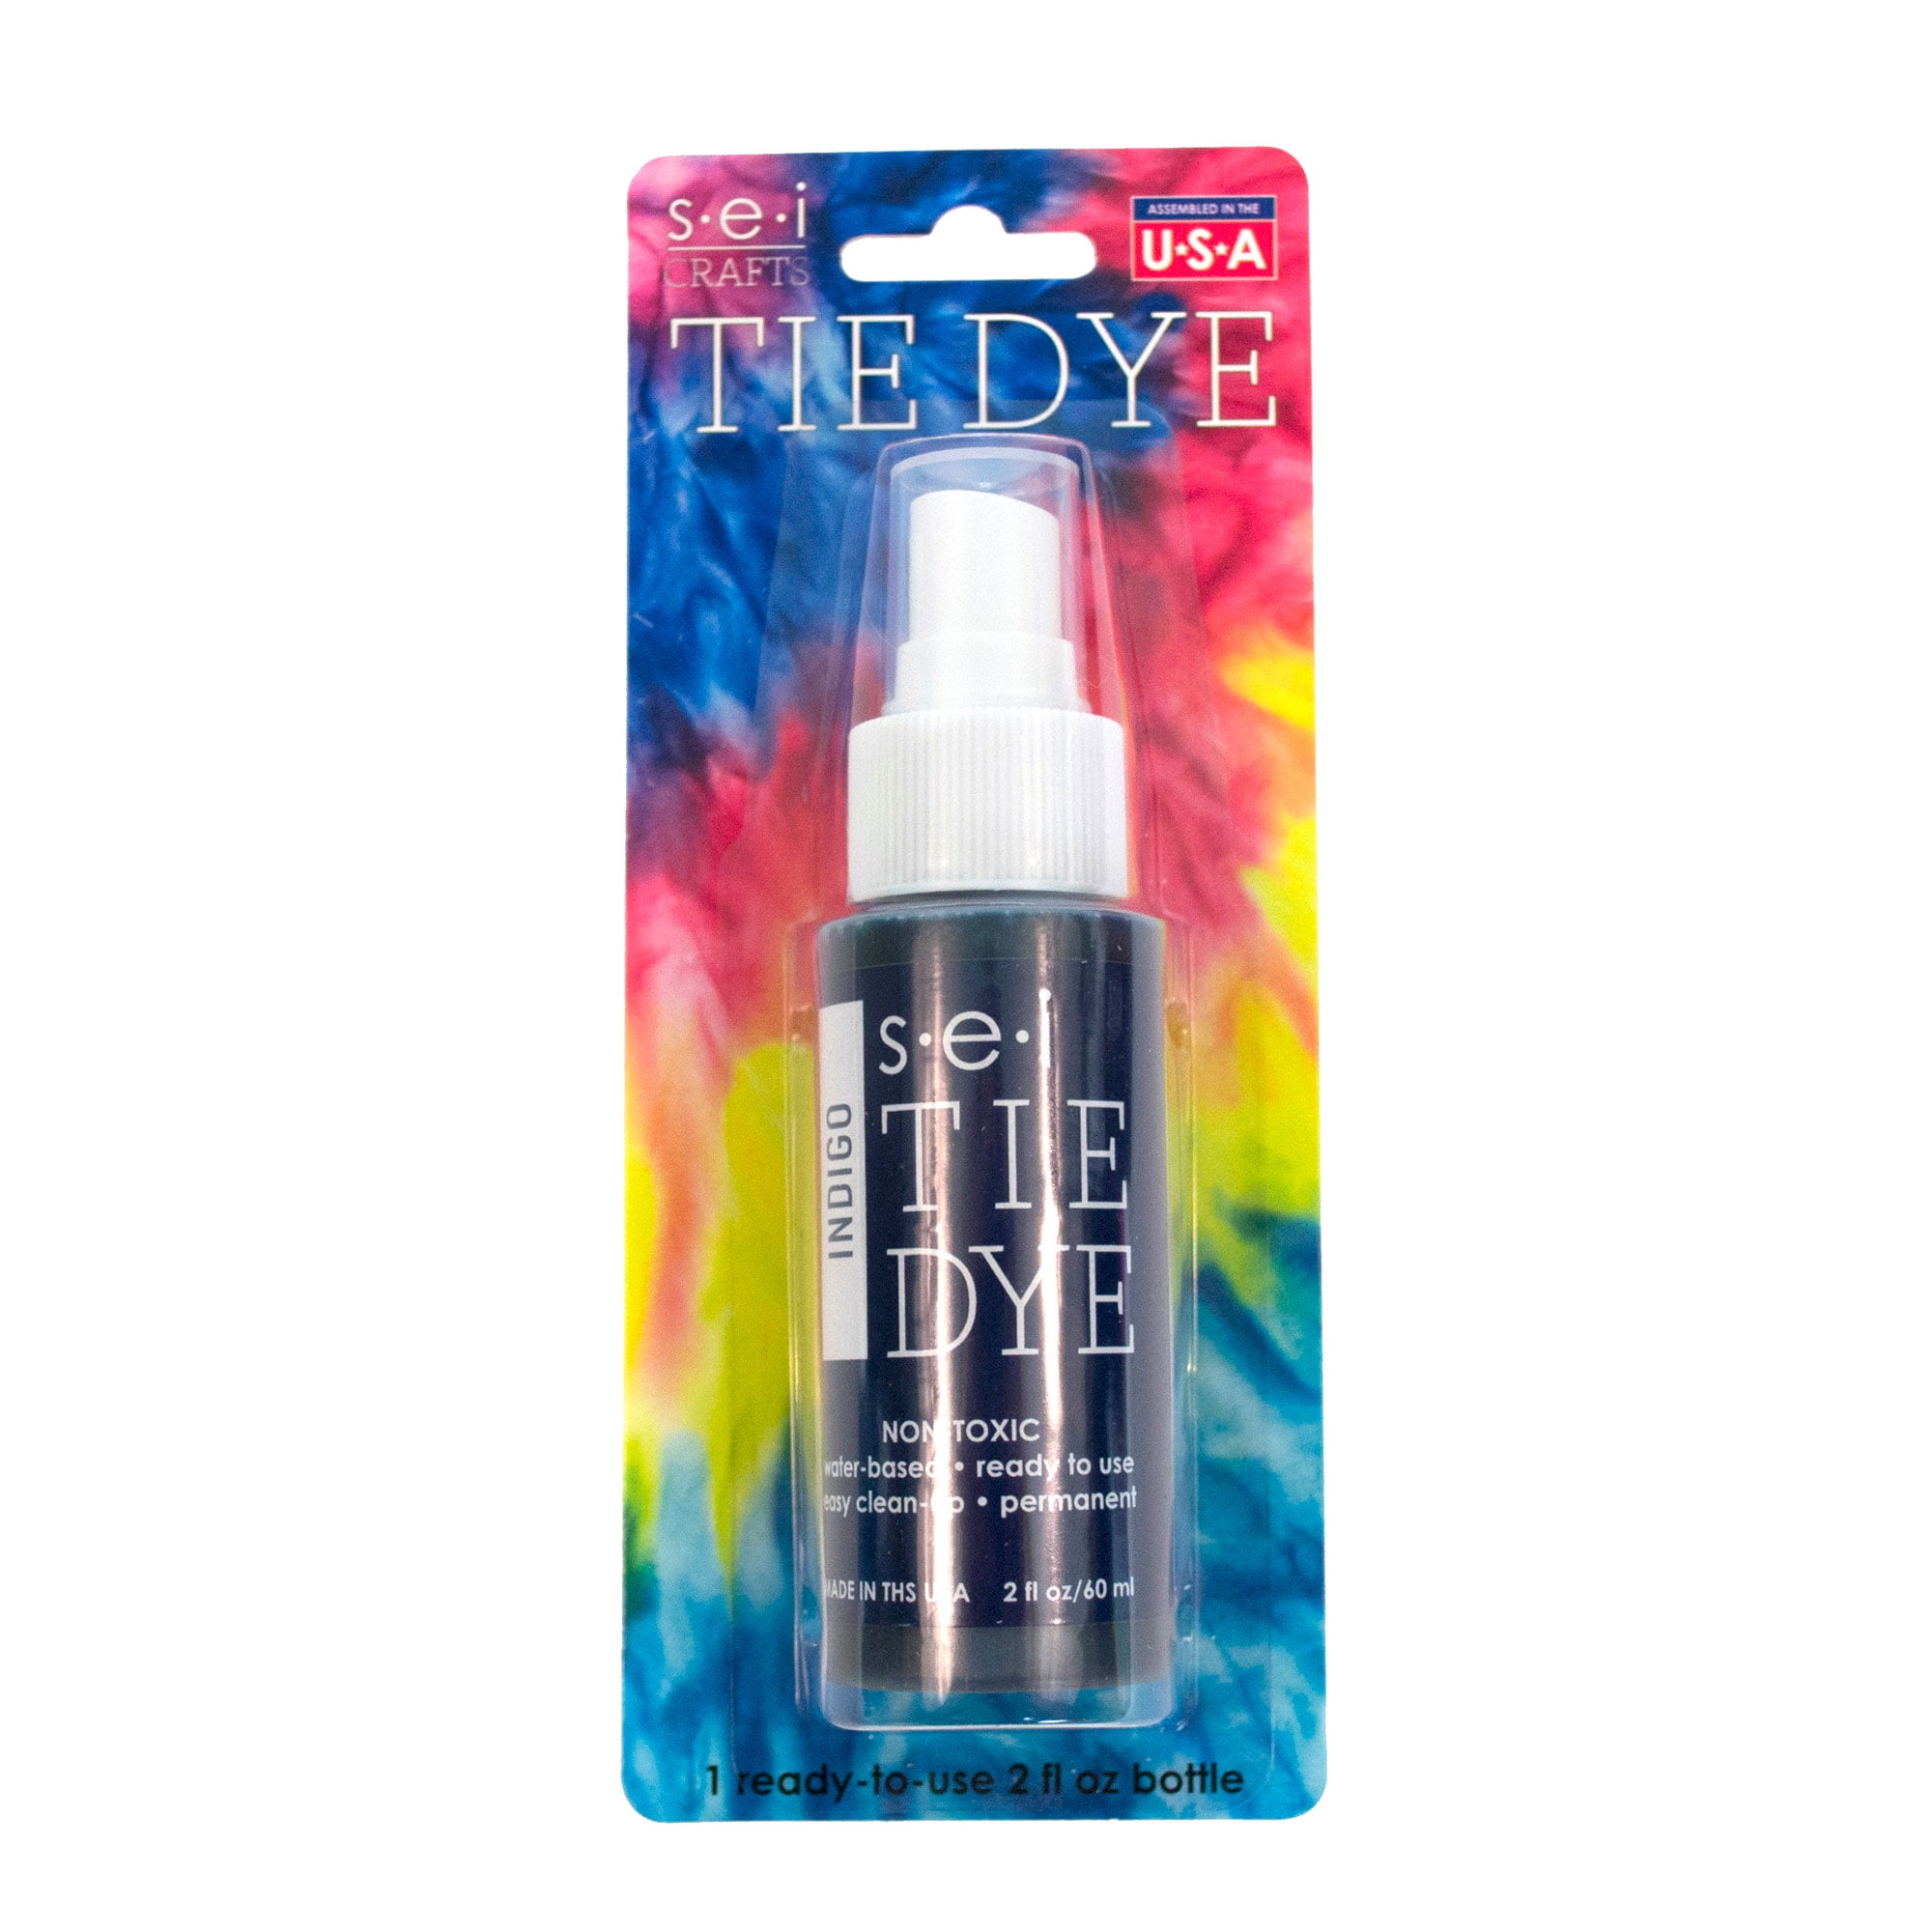 Virginia's Life, Such As It Is!: Tie Dye Radiance